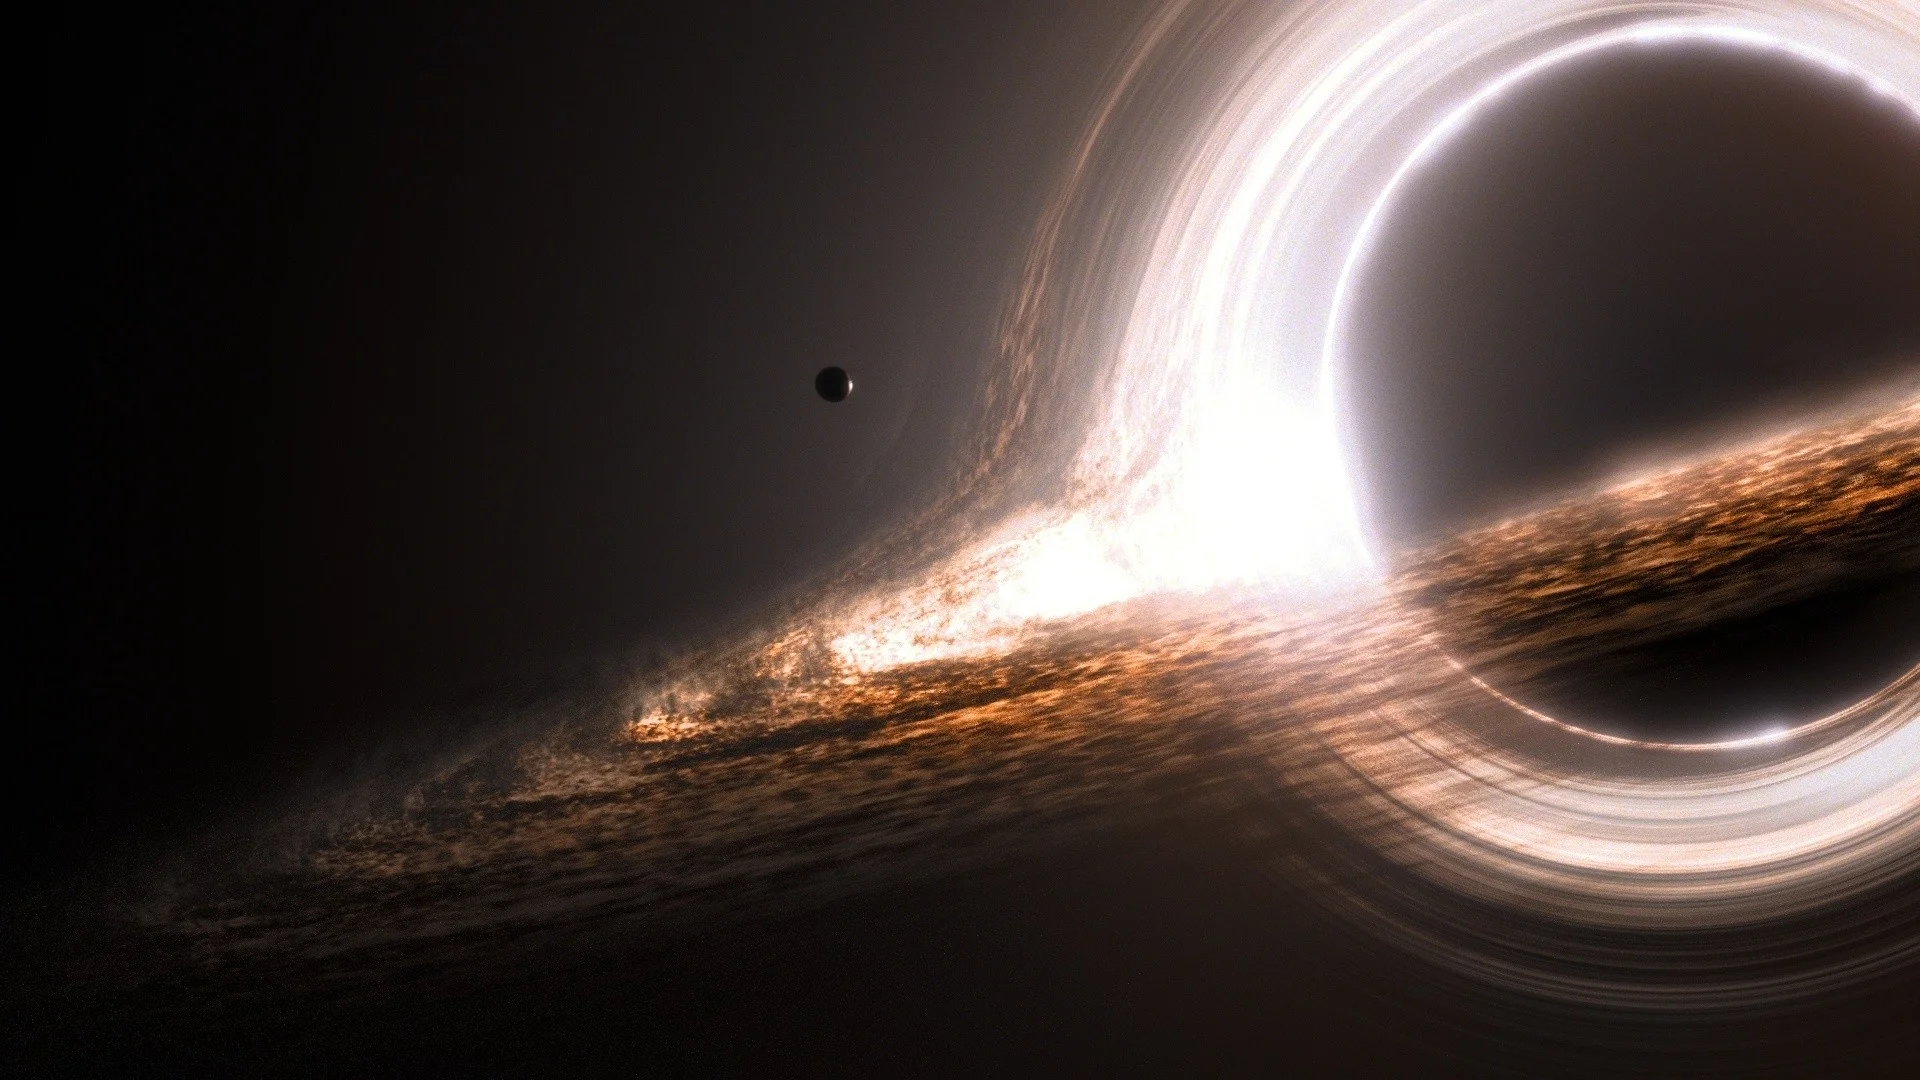 The black hole from the blockbuster Interstellar, which hired astrophysics guru Kip Thorne as a consultant to keep scientific accuracy through much of the